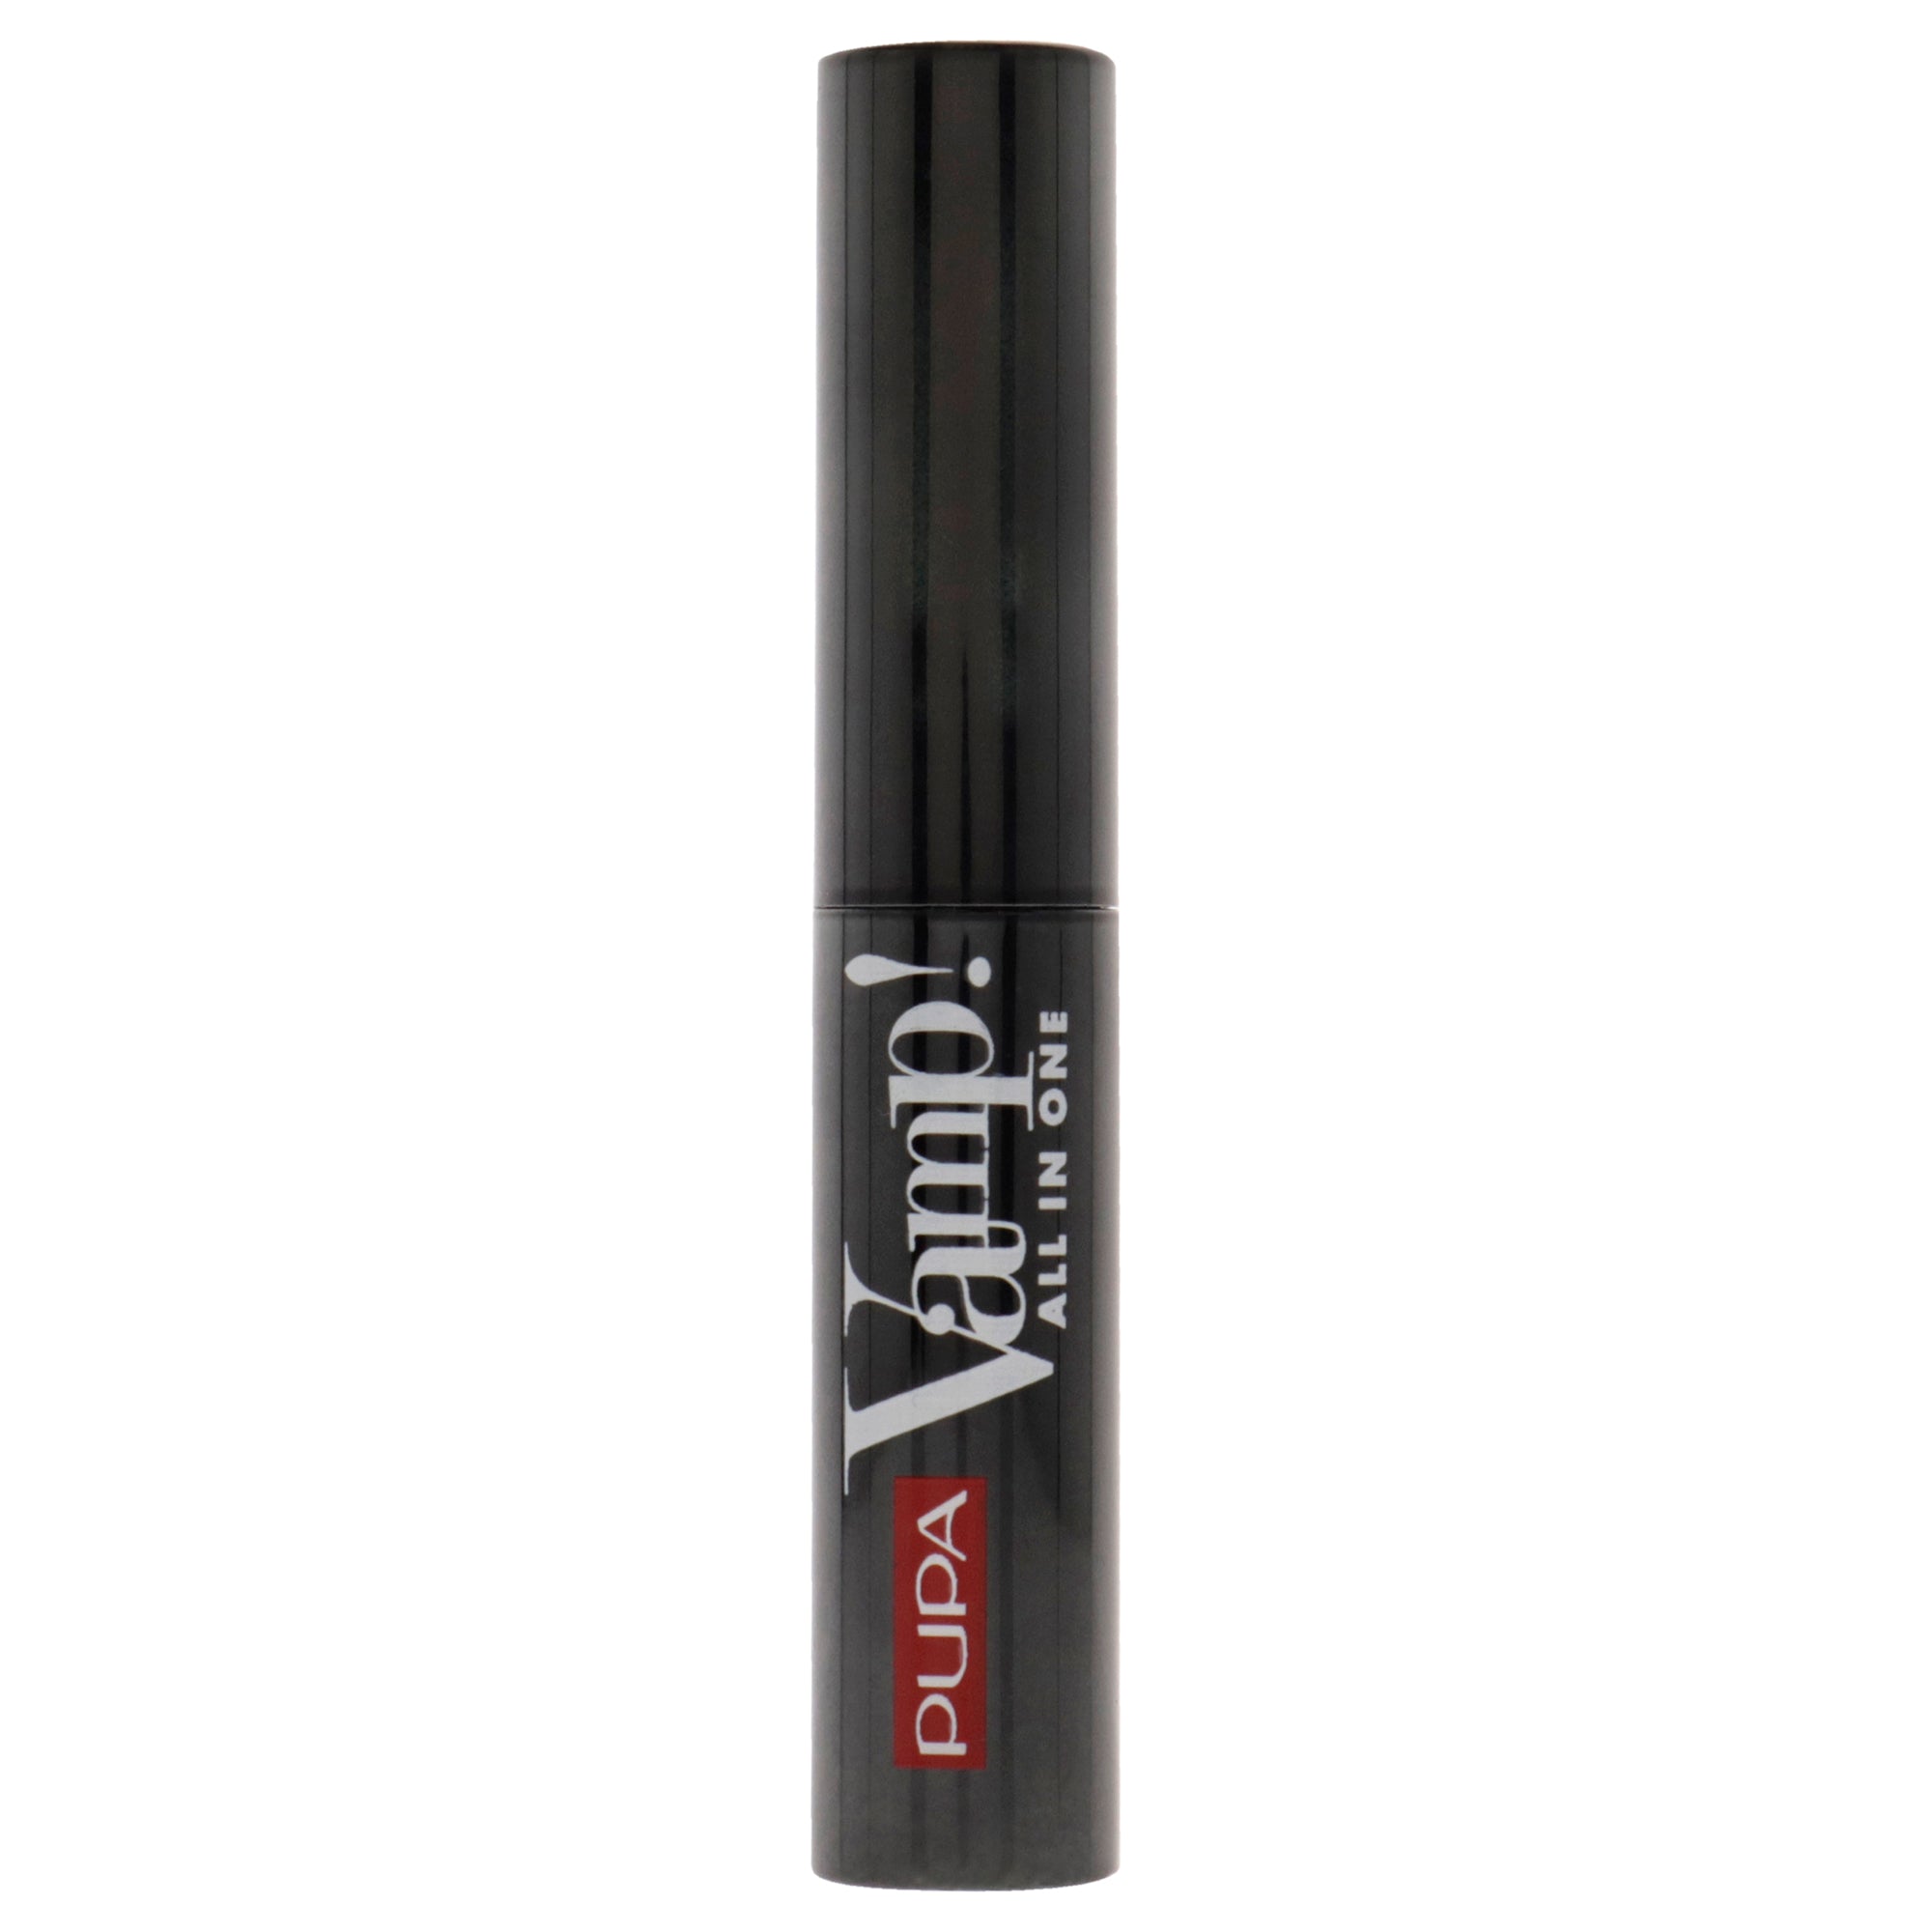 Vamp! All In One Mascara - 101 Extra Black by Pupa Milano for Women - 0.16 oz Mascara